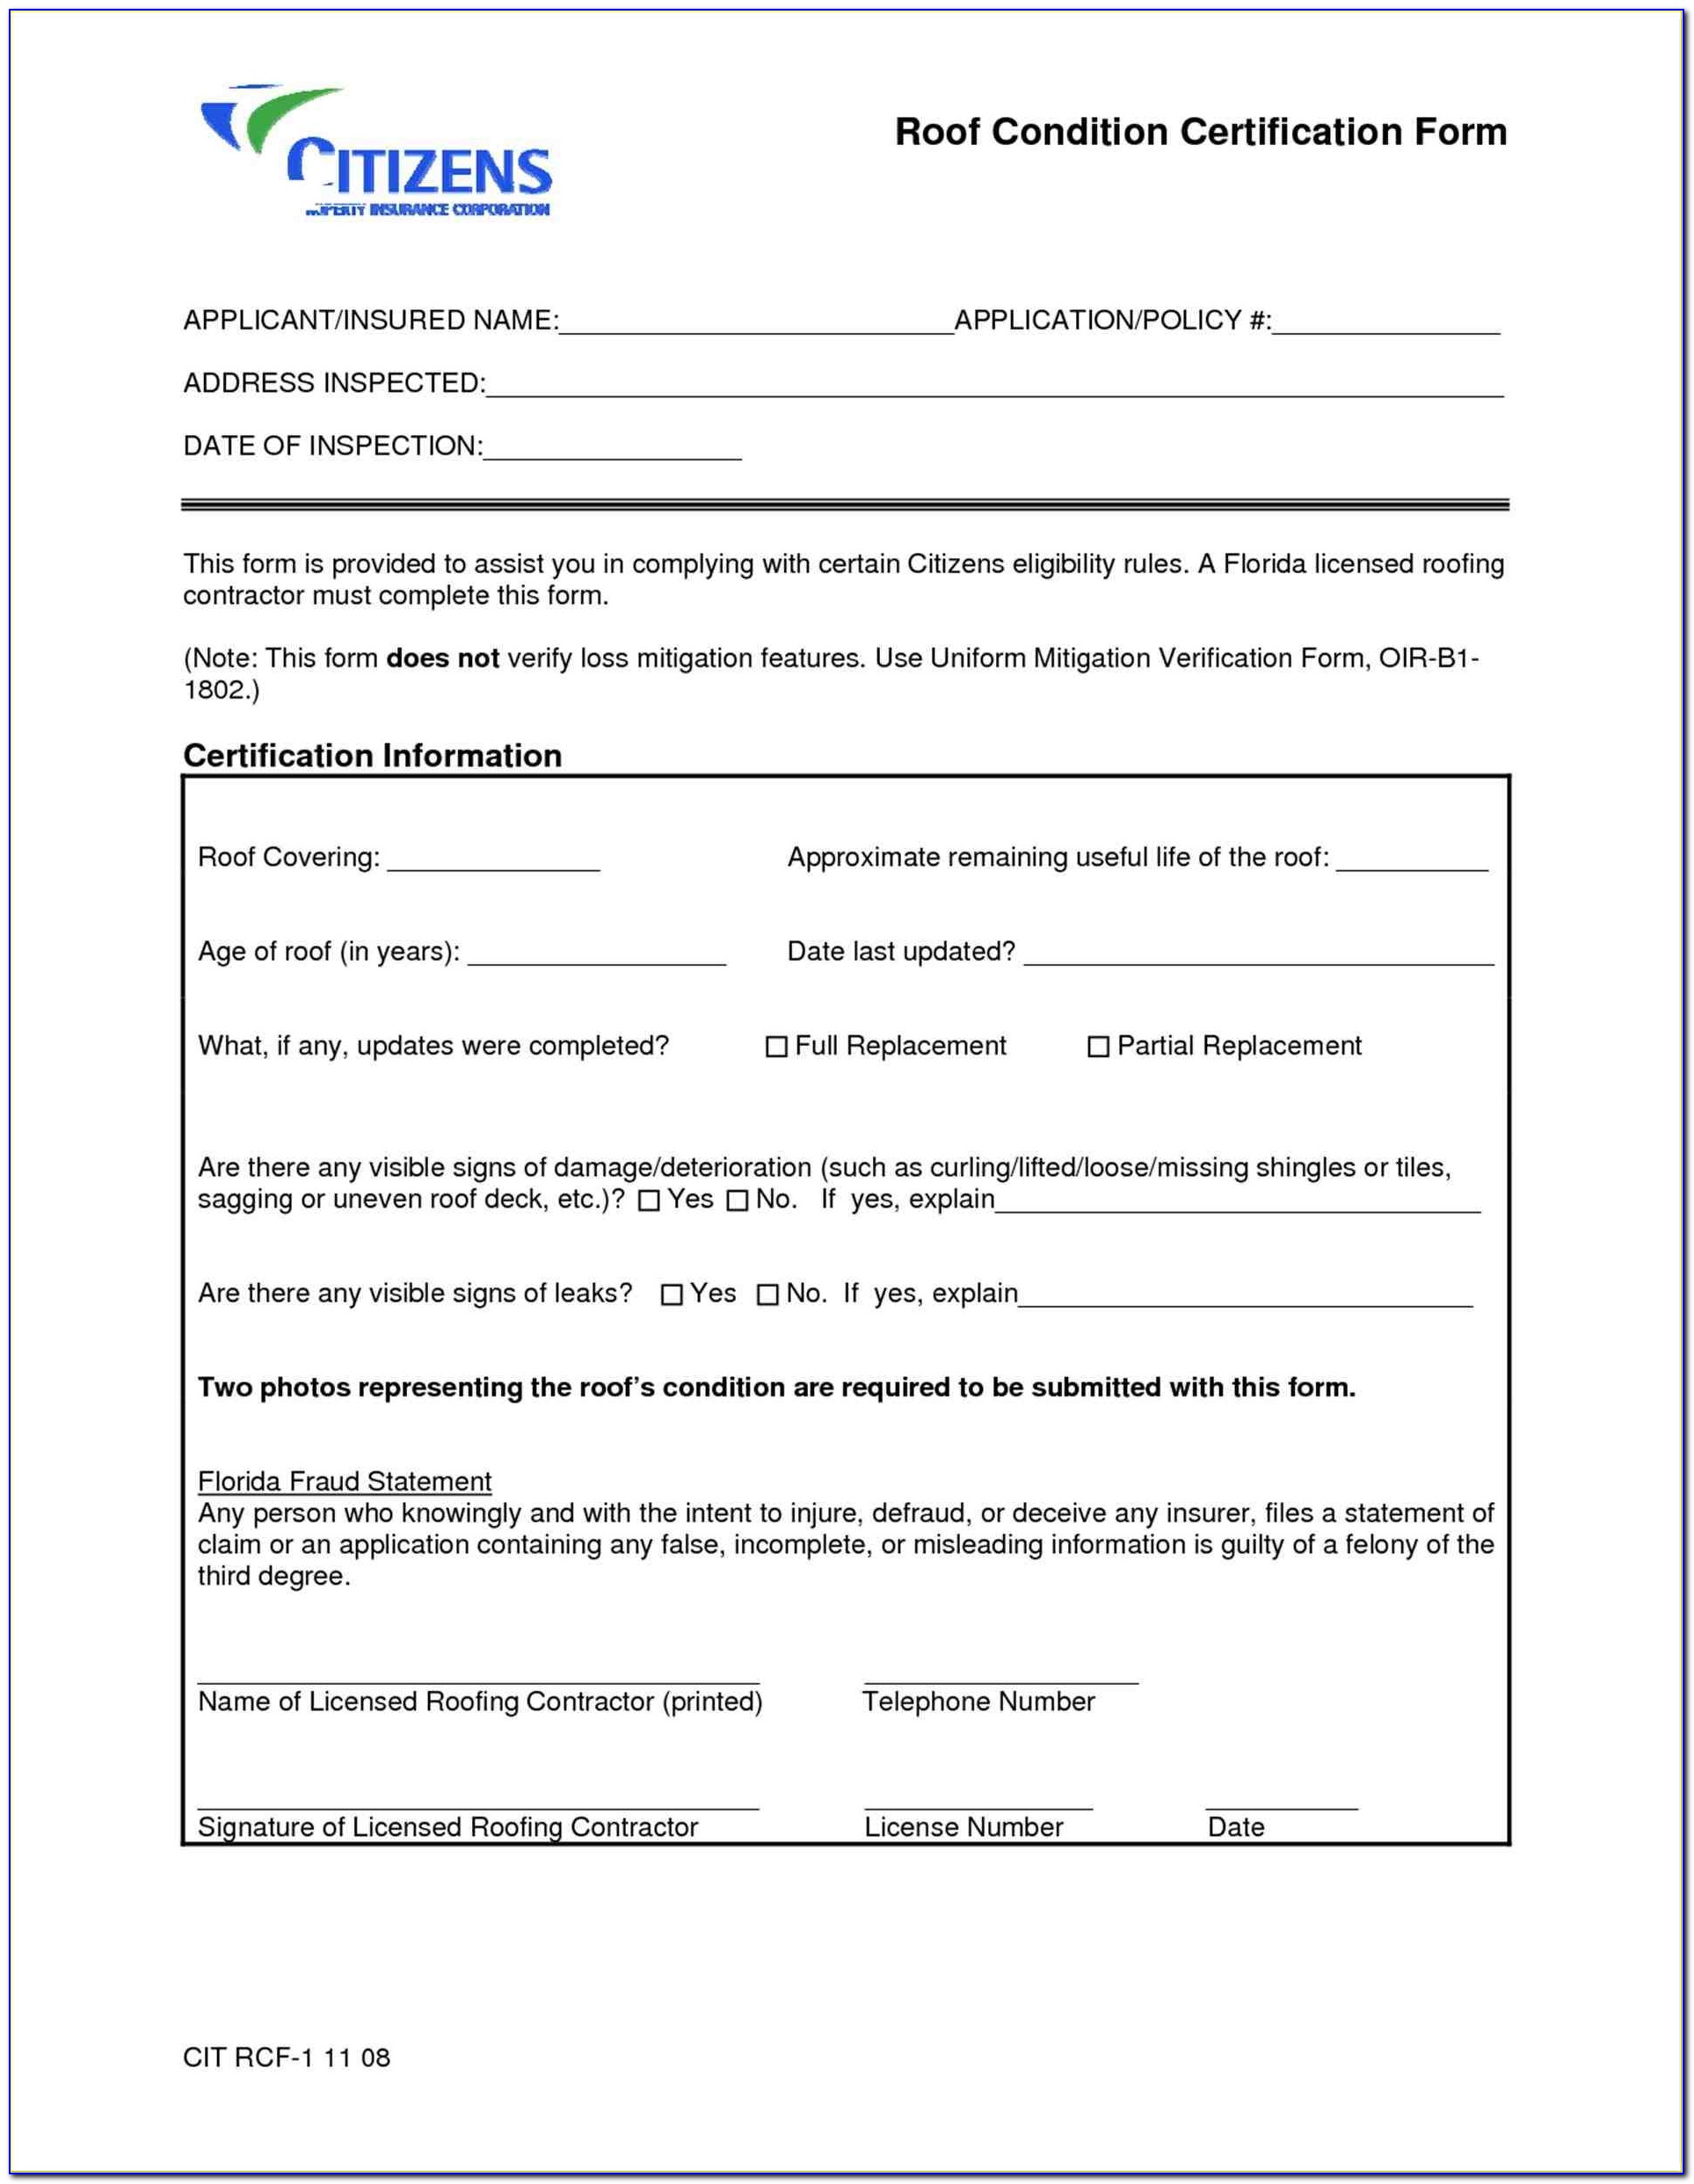 Certainteed Roofing Warranty Claim Form